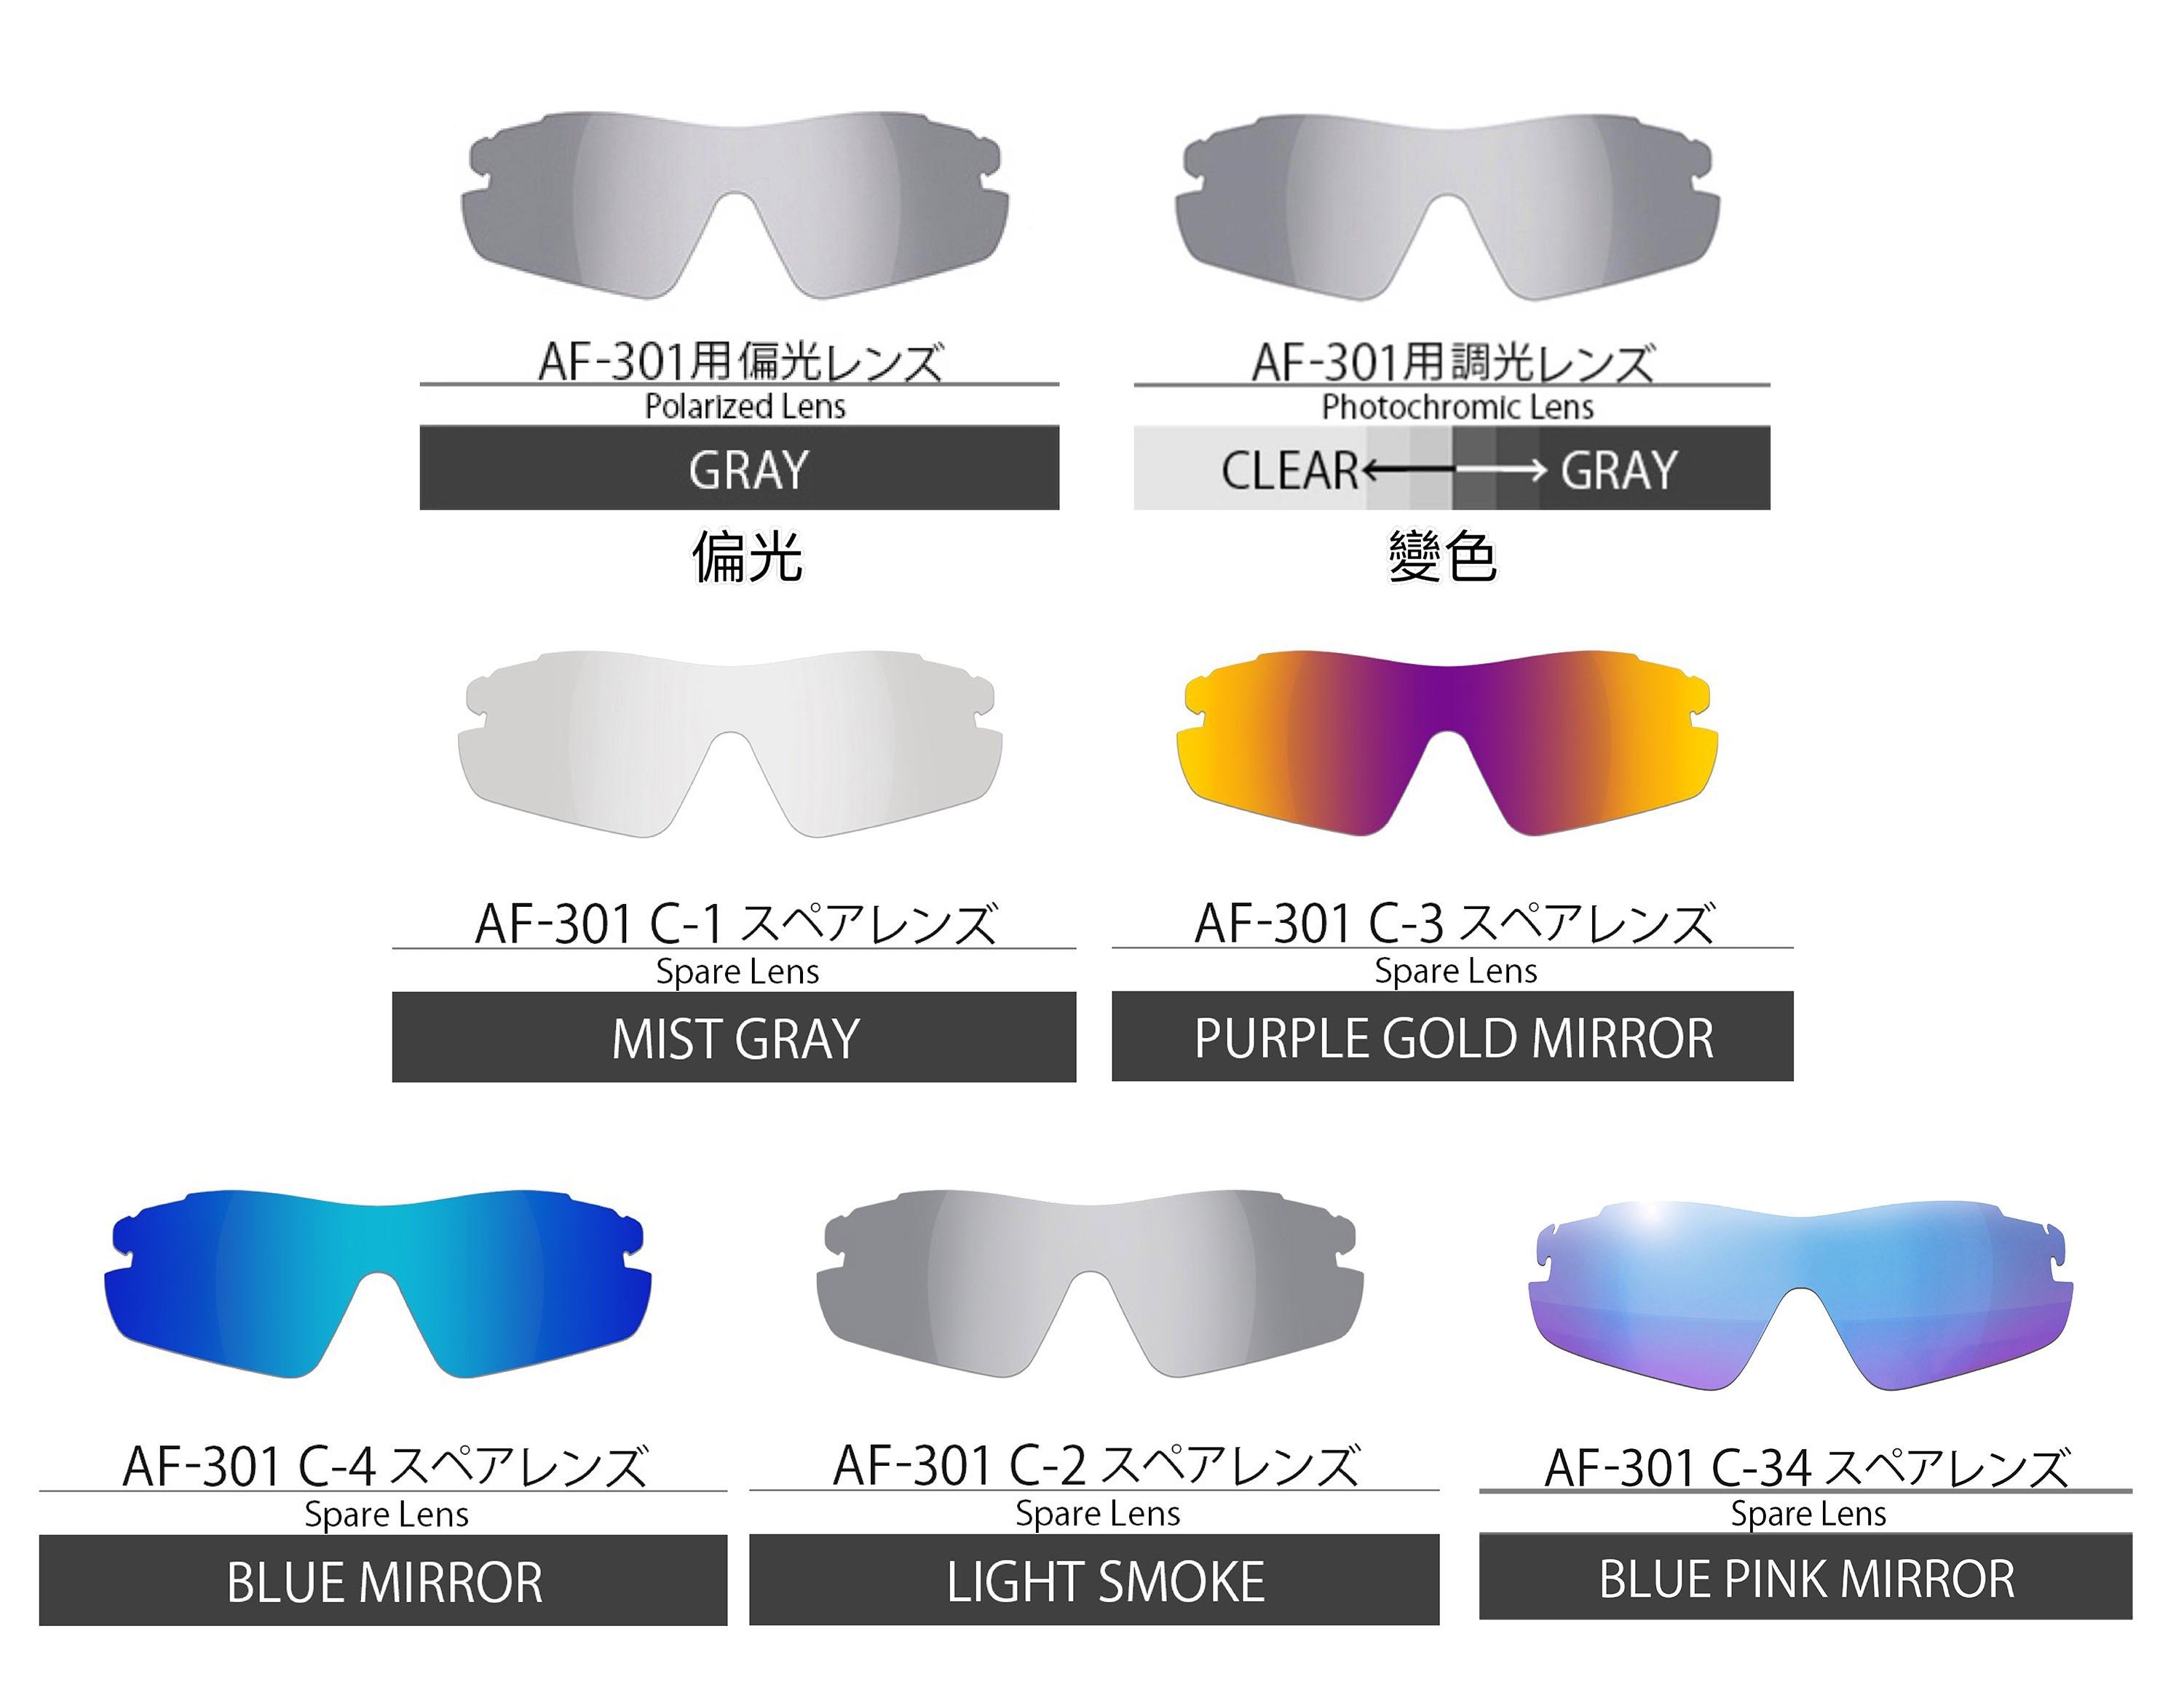 AirFly - AF301 C2( Photochromic Gray Lens)【Pre-order Now】